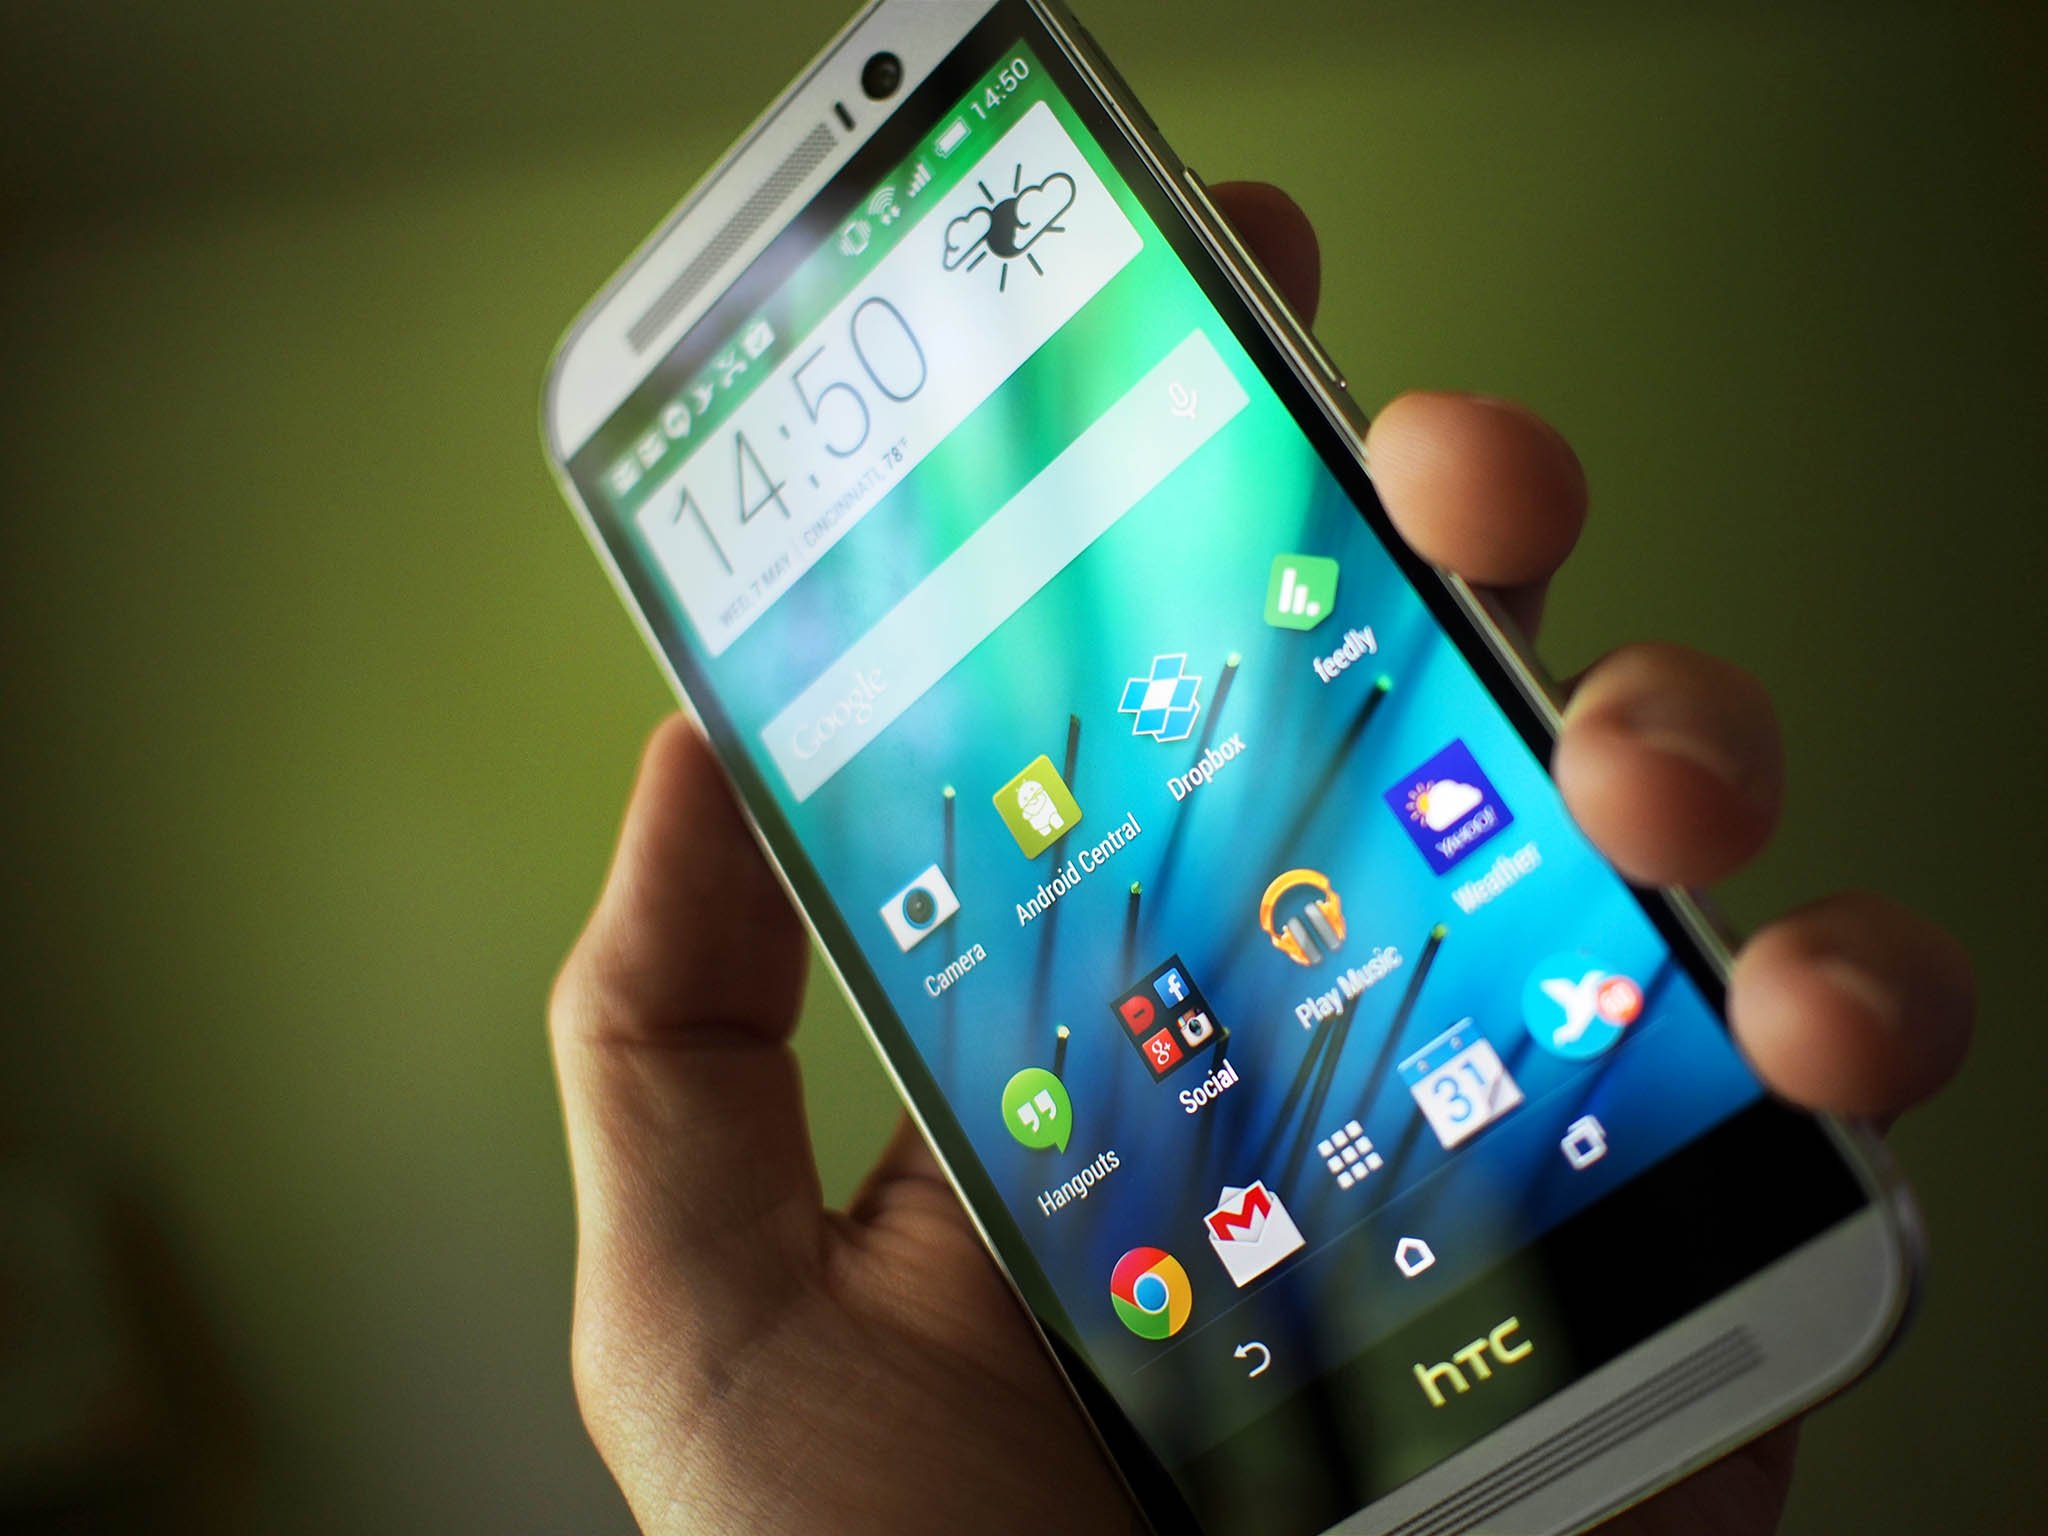 The HTC One M8 will be $100 off tomorrow from HTC.com